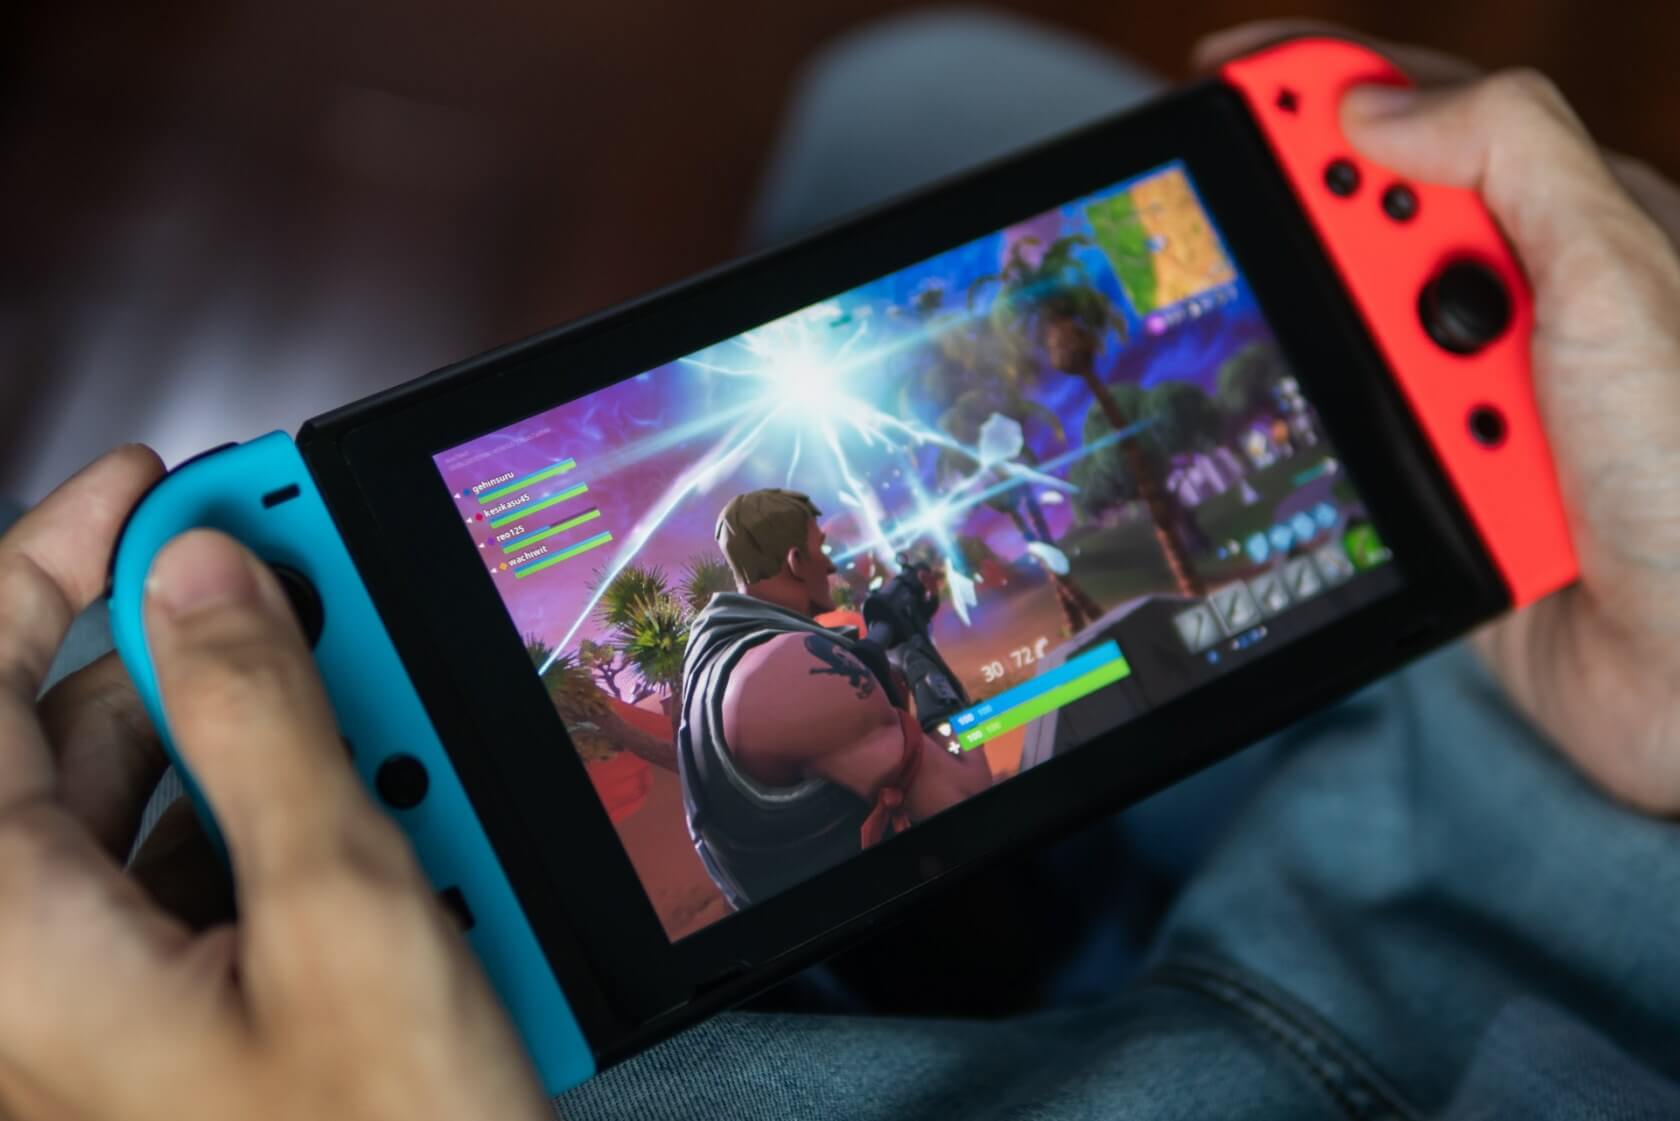 Nintendo Switch shortage is being worsened by auto-purchase bots